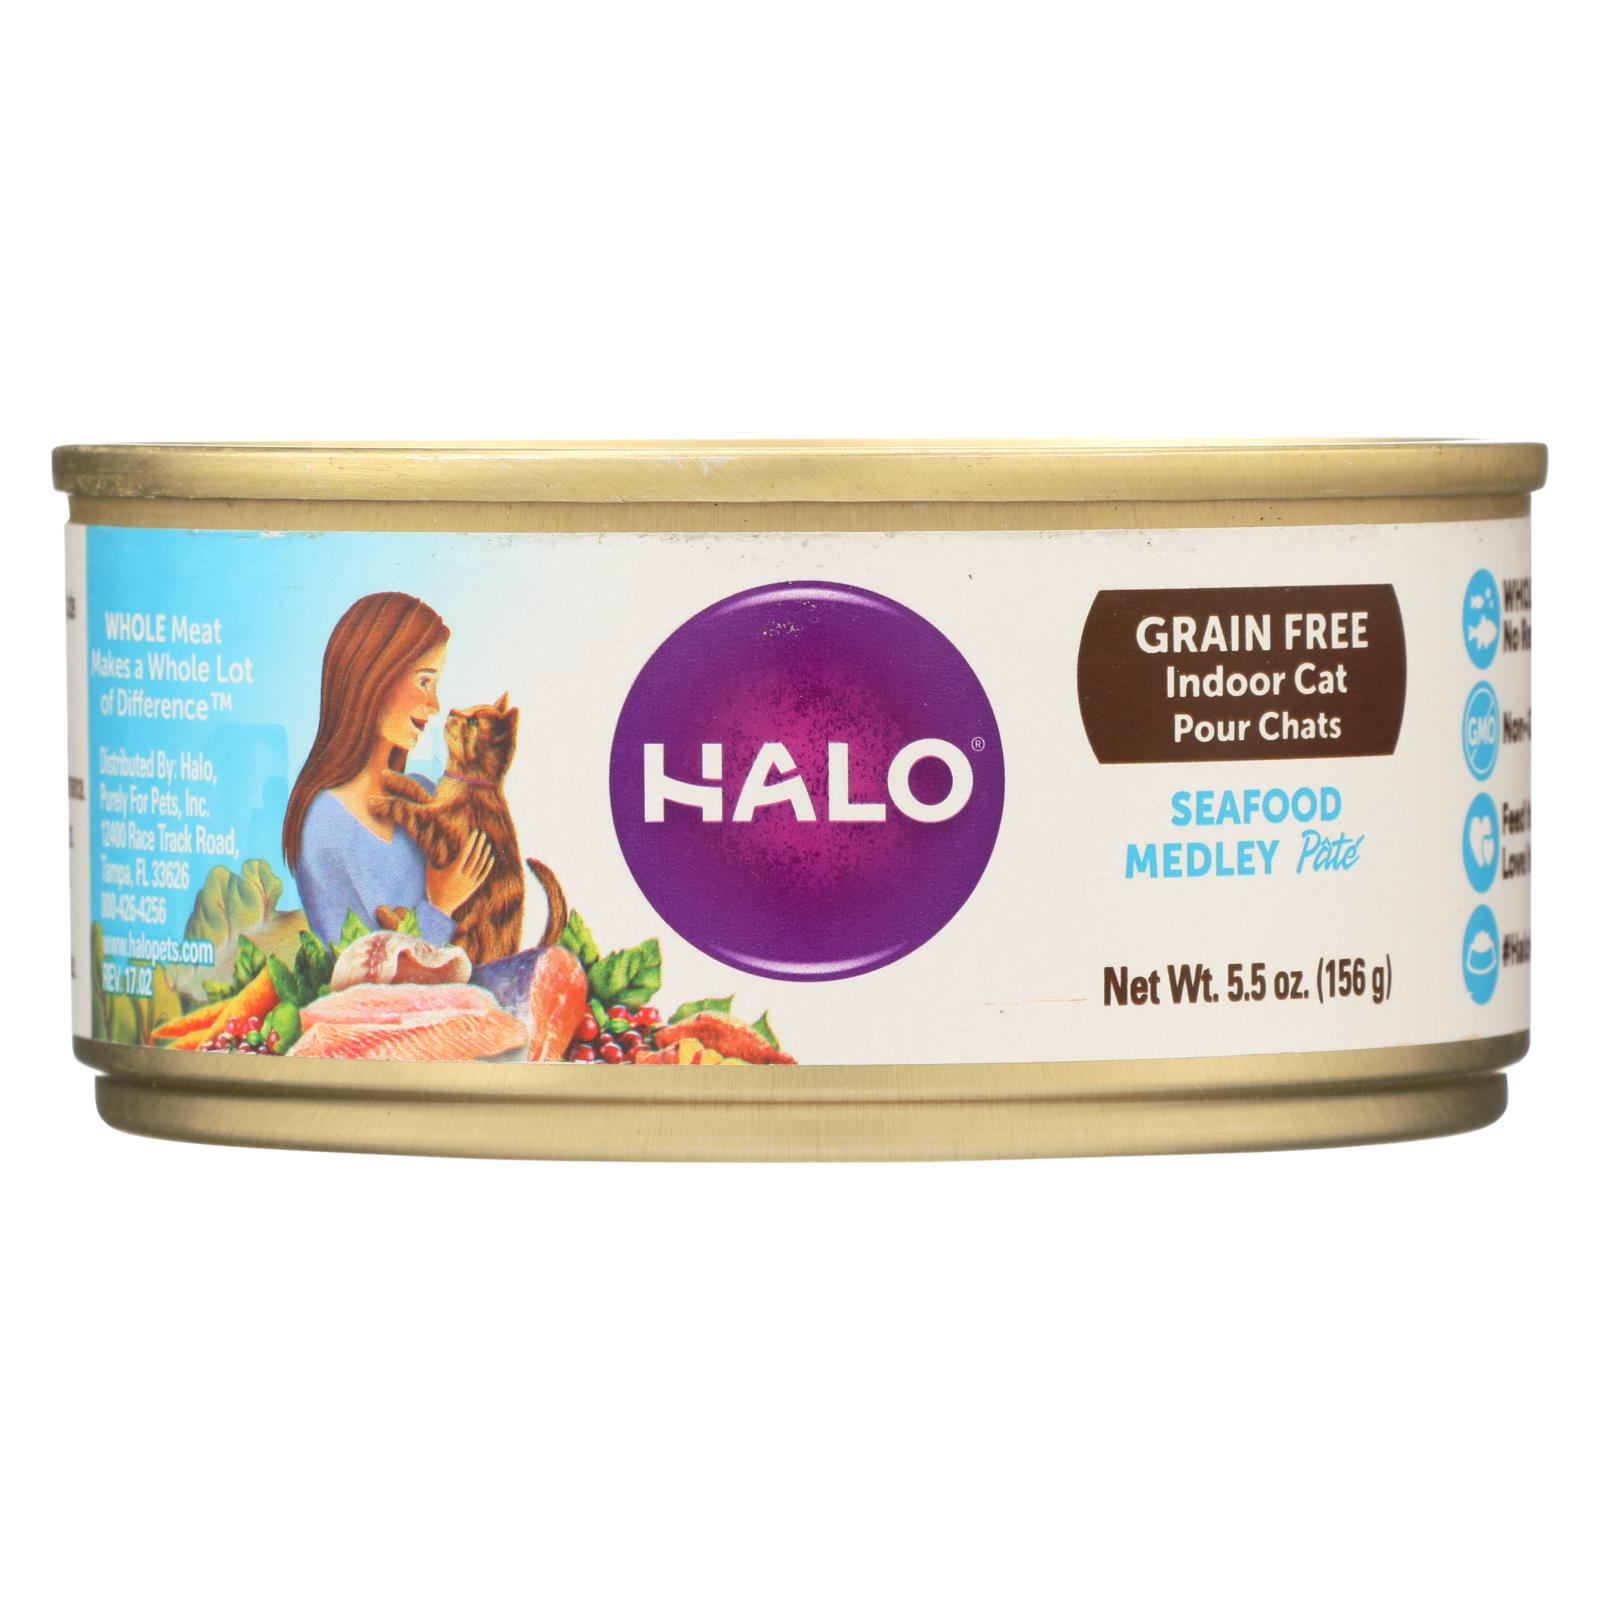 Halo Purely For Pets Indoor Cat Grain Free Seafood Medley Recipe Pate - Case of 12 - 5.5 OZ